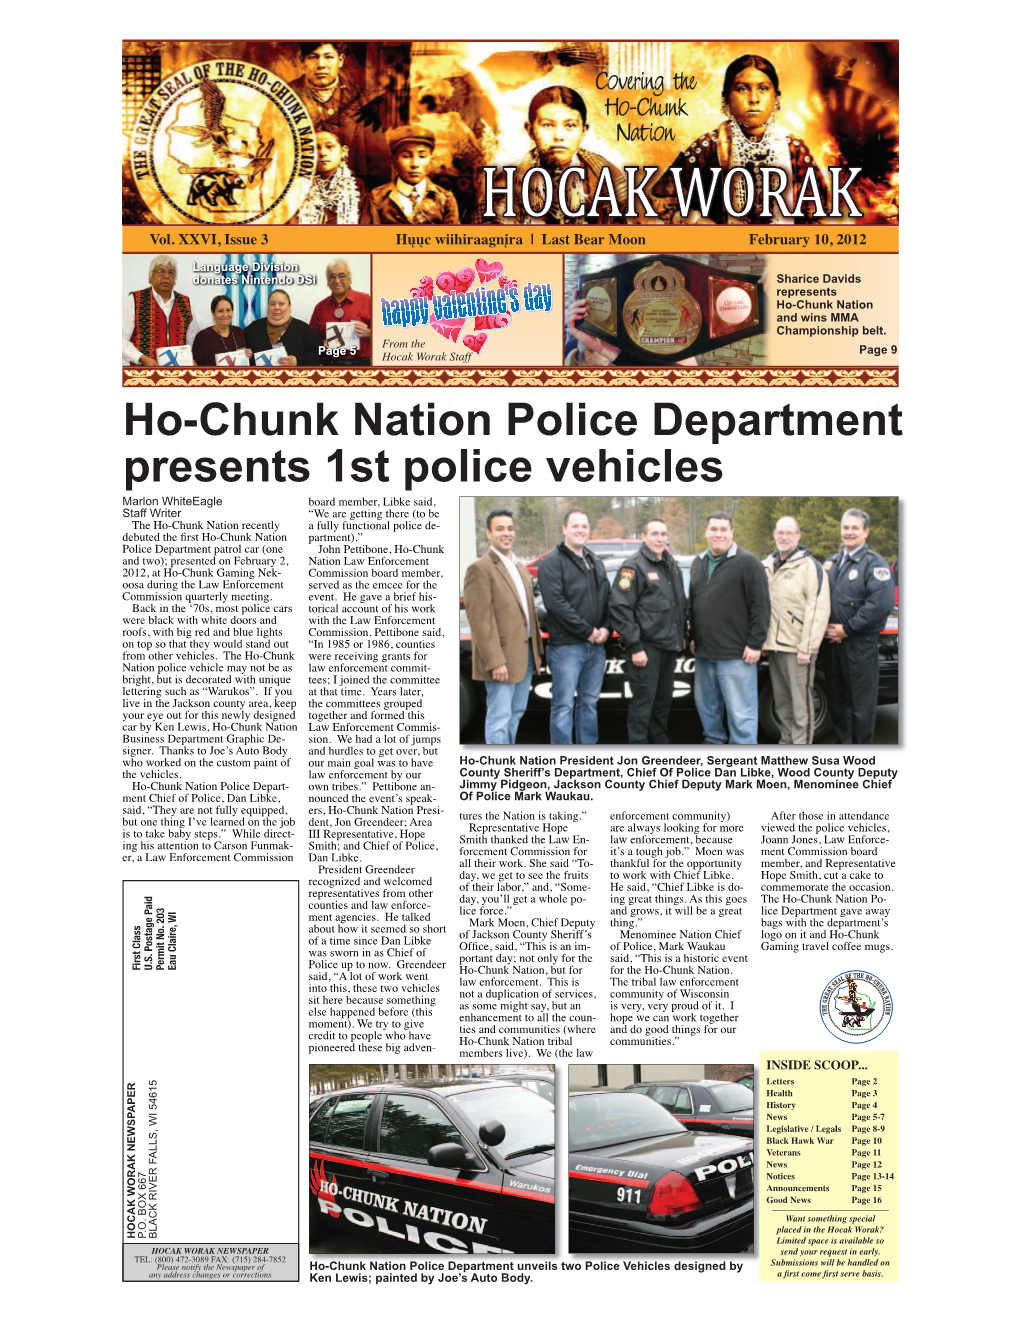 Ho-Chunk Nation Police Department Presents 1St Police Vehicles